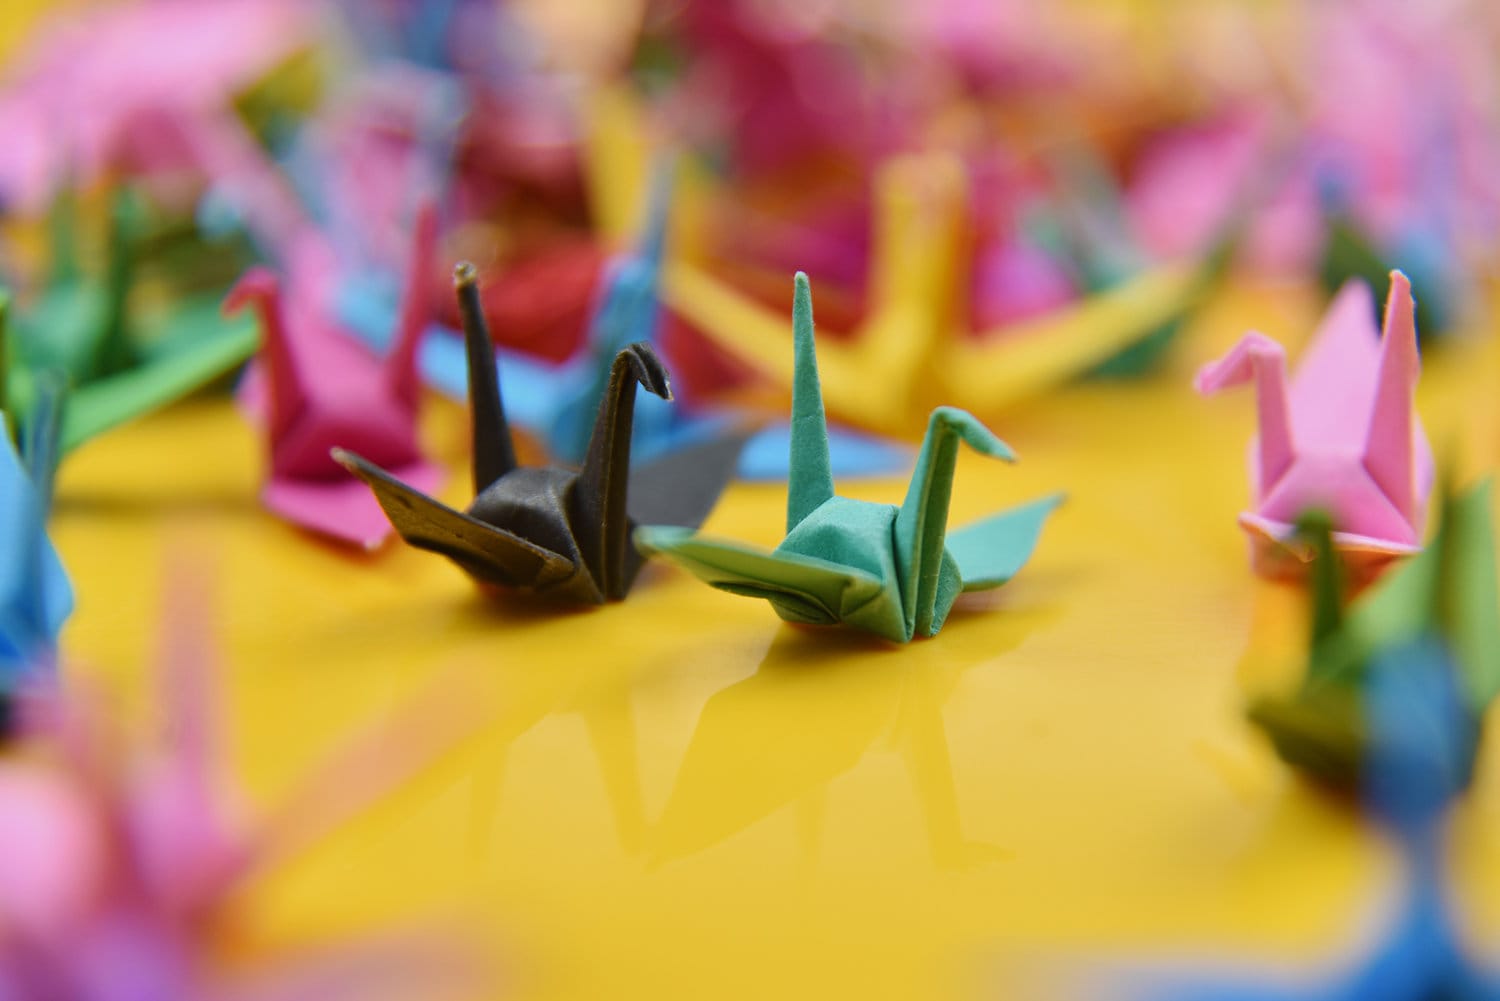 1000 Rainbow Color Origami Paper Crane Made of 3.81cm (1.5 inches) for Wedding Decor